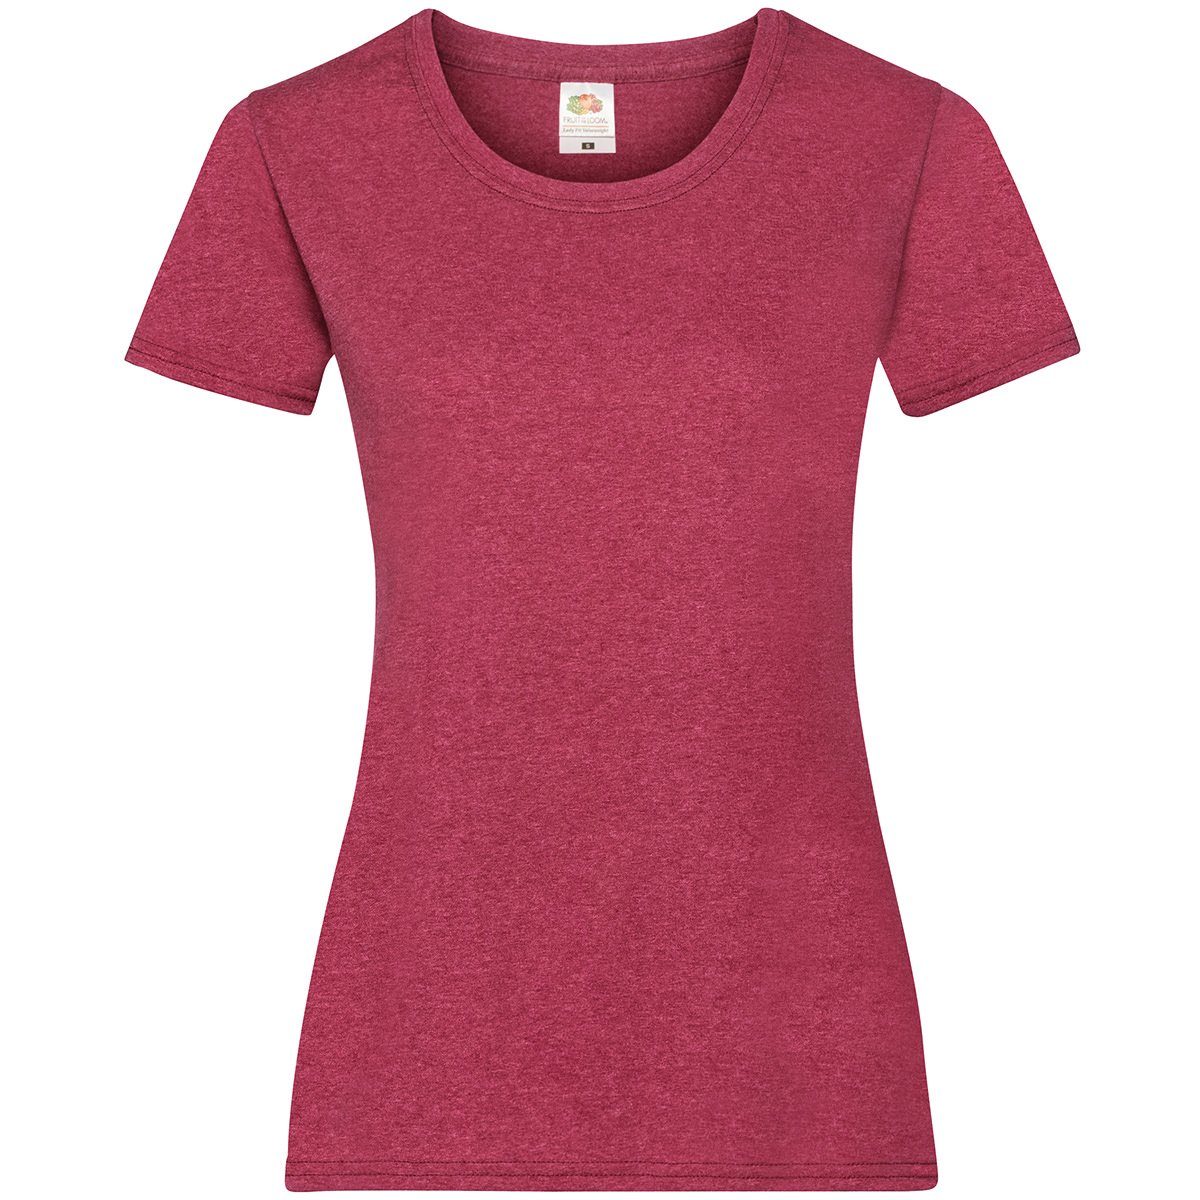 Fruit of the Loom Rundhalsshirt Fruit of the Loom Valueweight T Lady-Fit vintage rot meliert